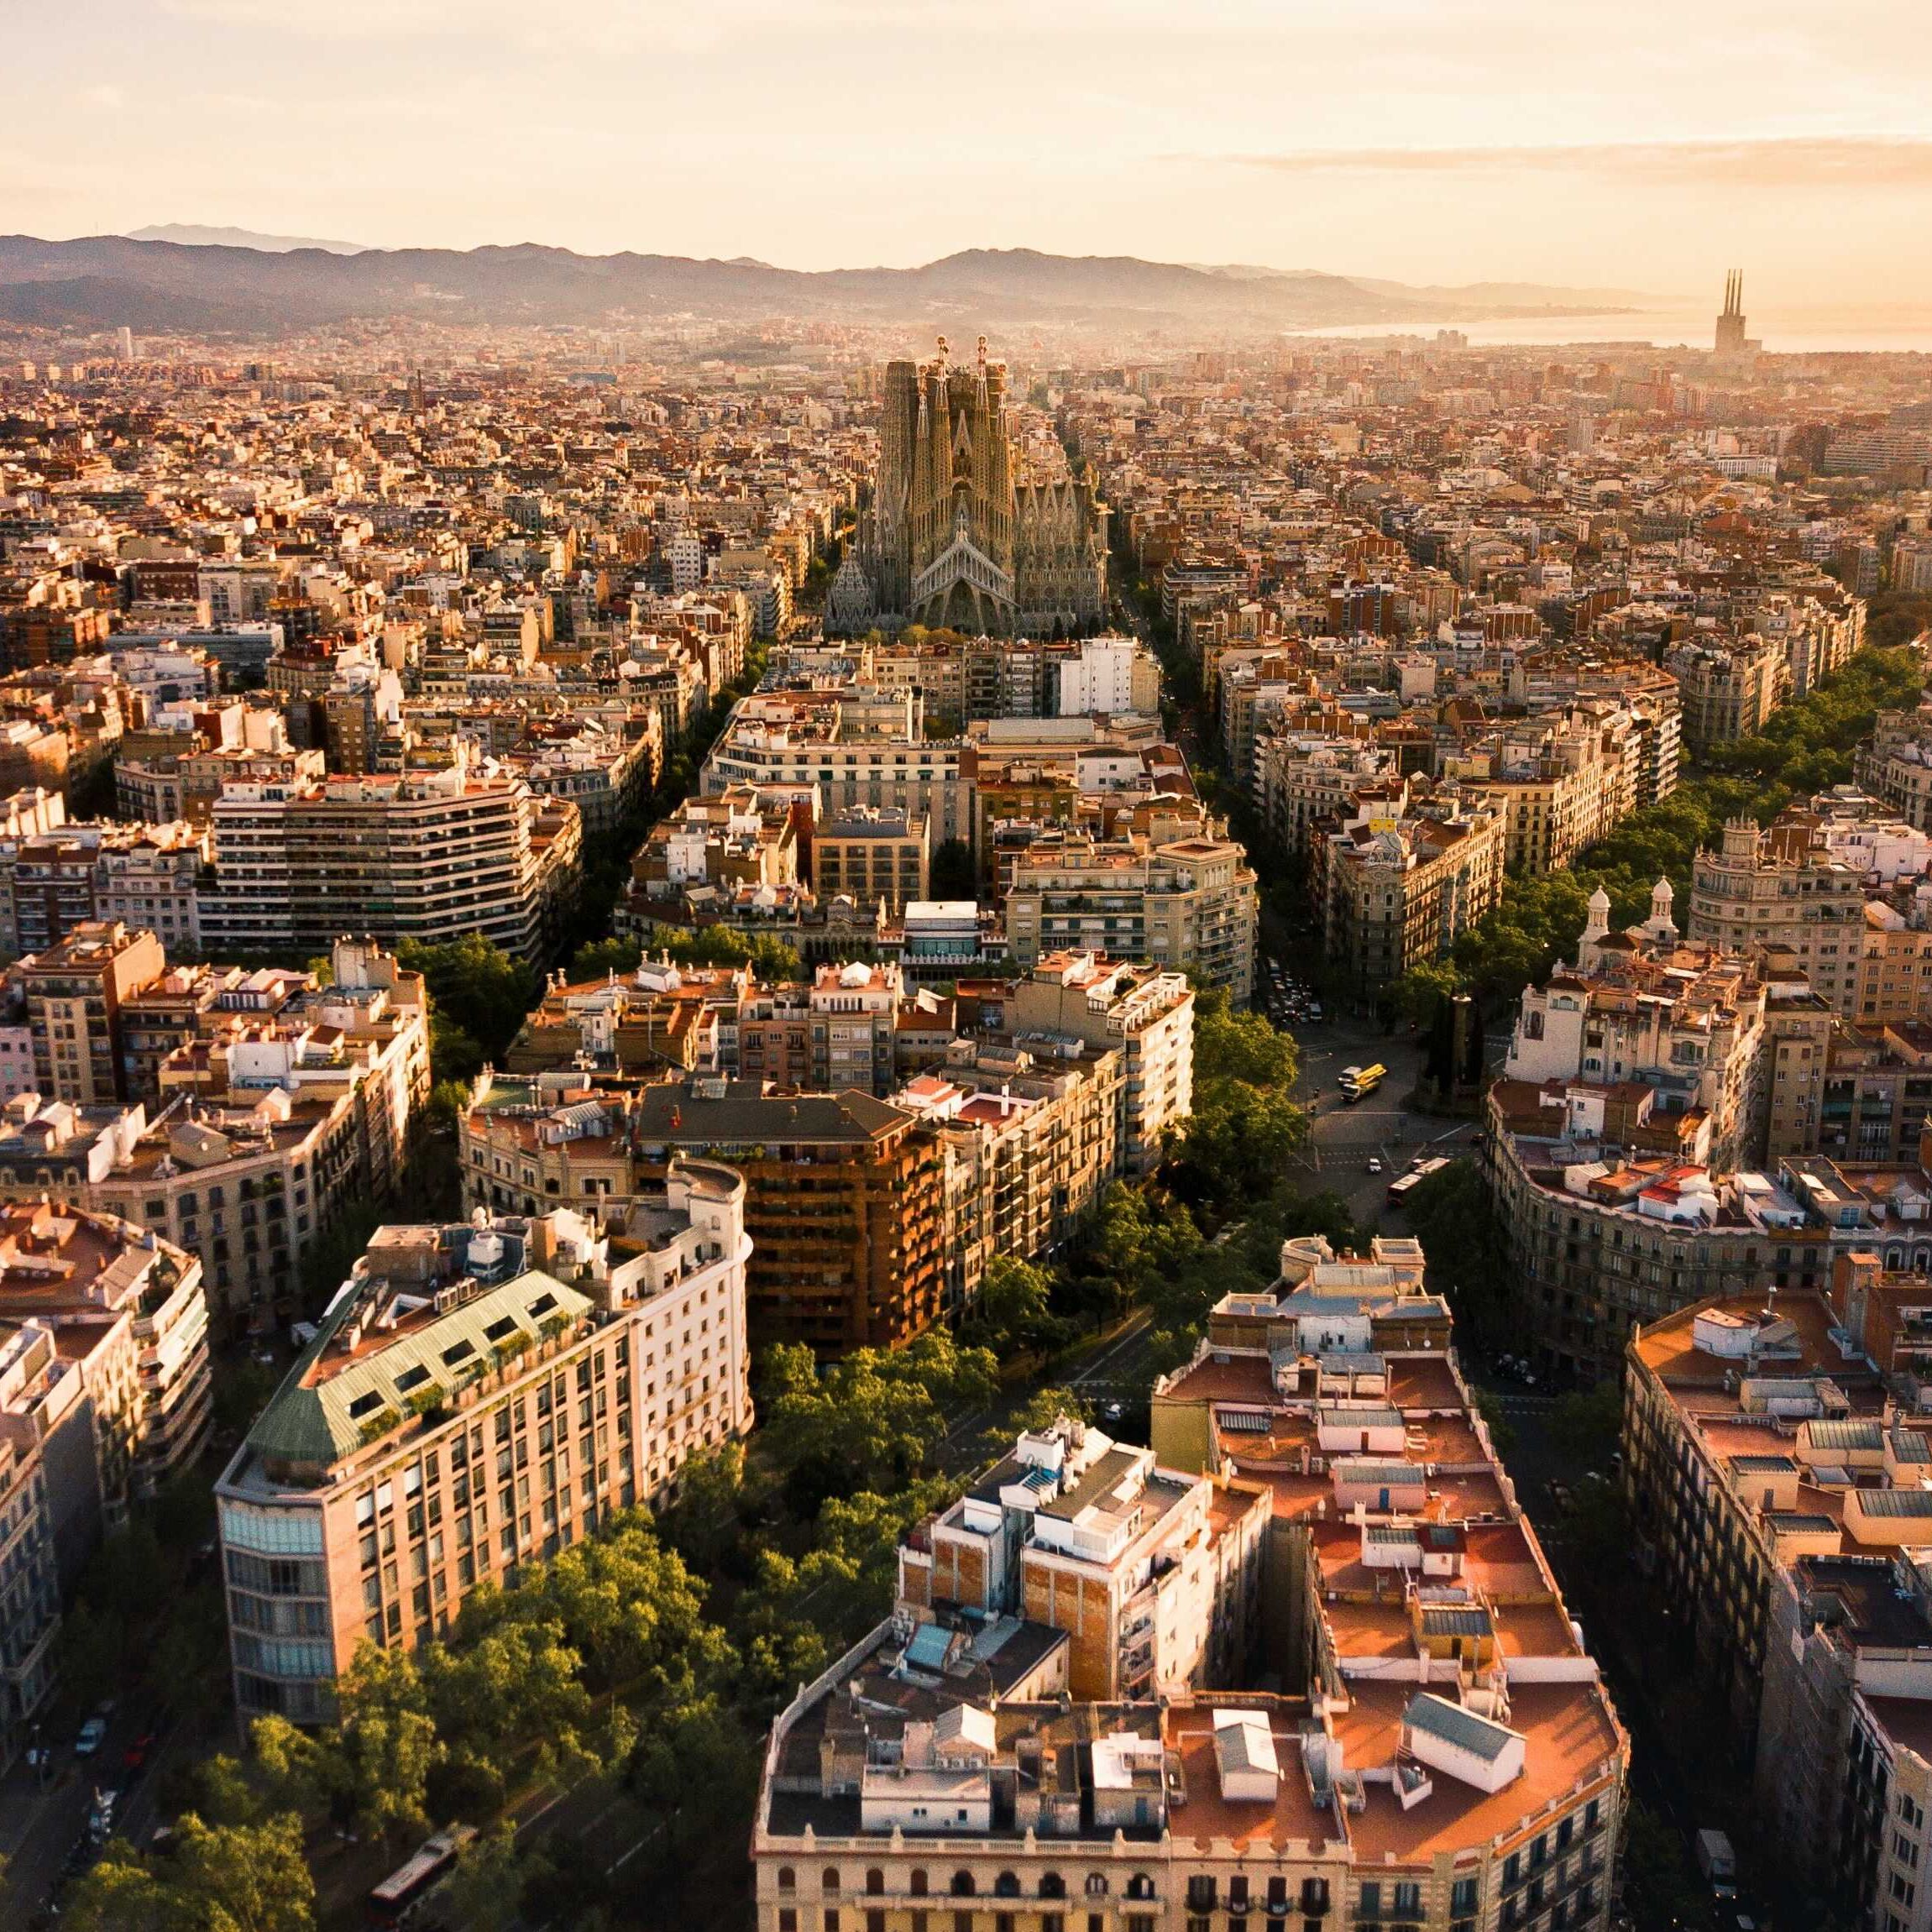 www.theguardian.com/world/2020/nov/11/barcelona-launches-10-year-plan-to-reclaim-city-streets-from-cars